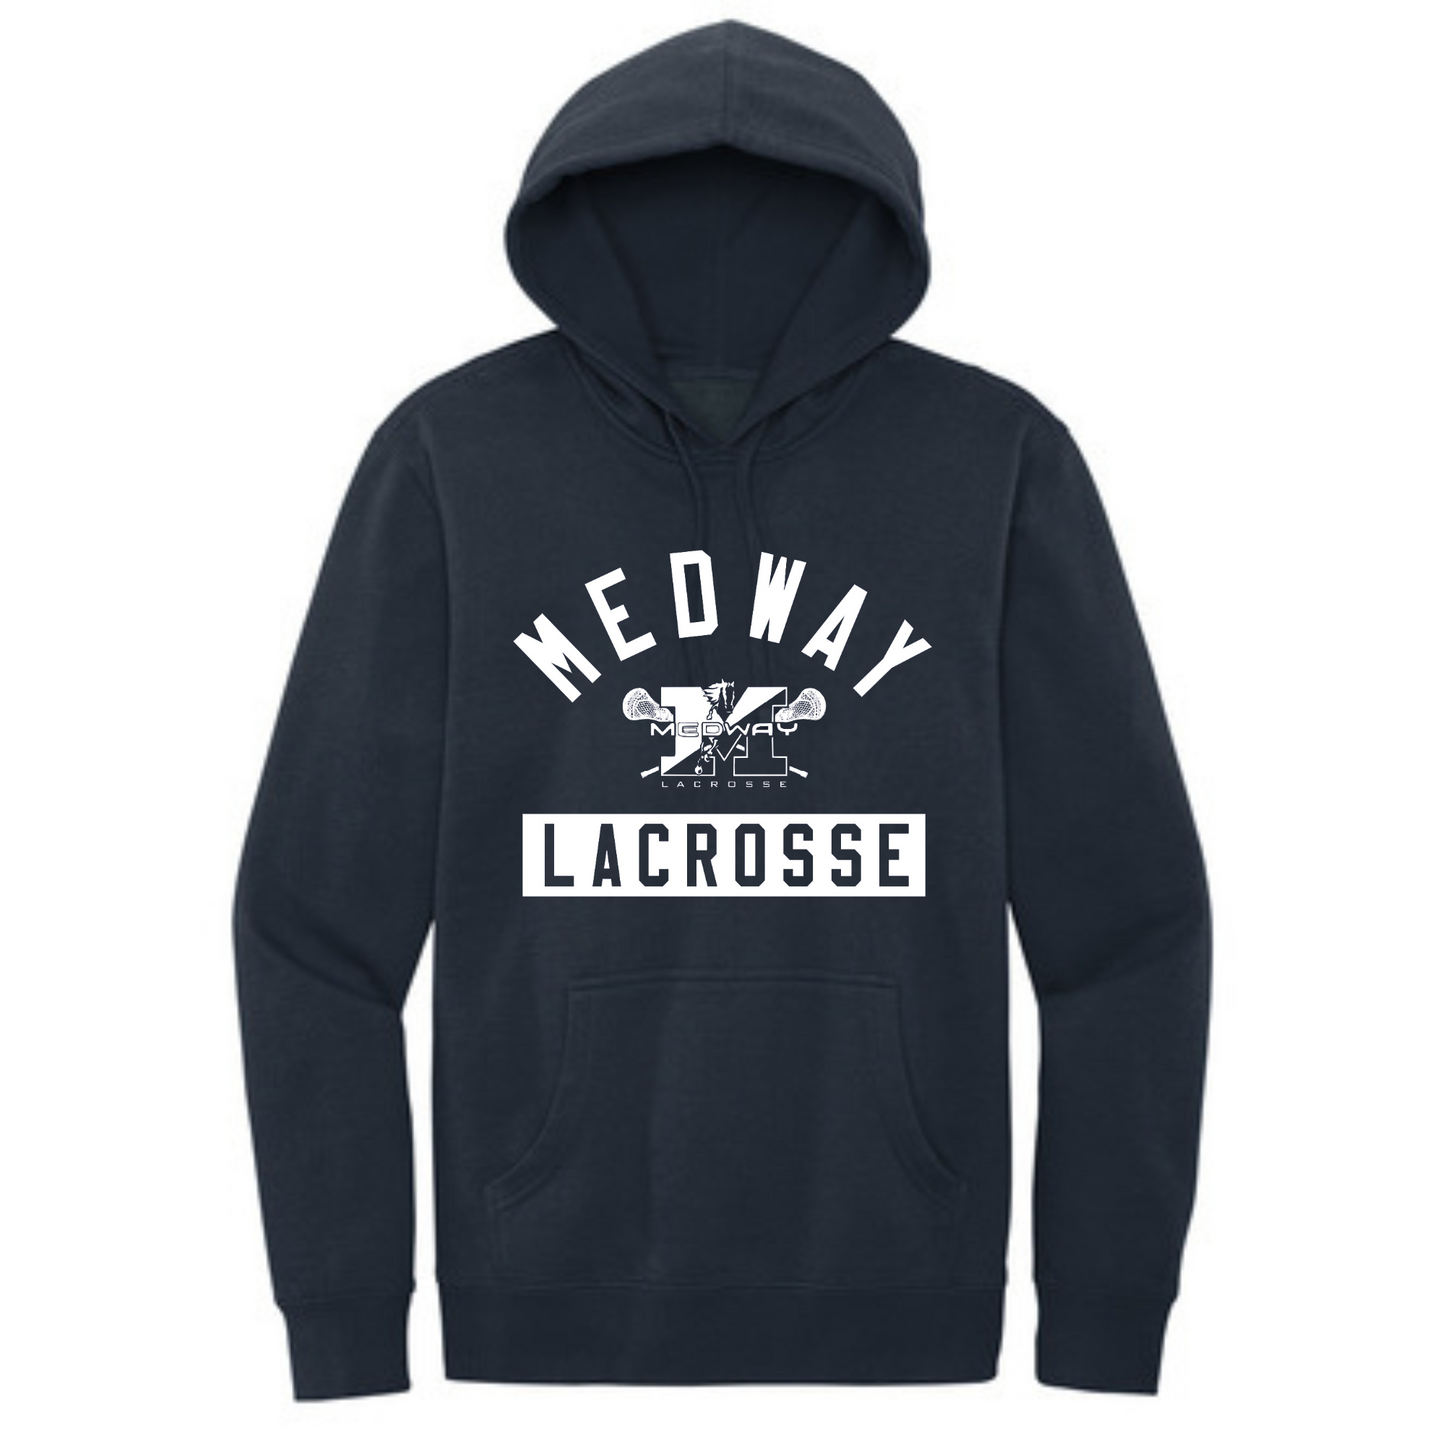 MEDWAY YOUTH LACROSSE ARCH ADULT HOODIE - NAVY